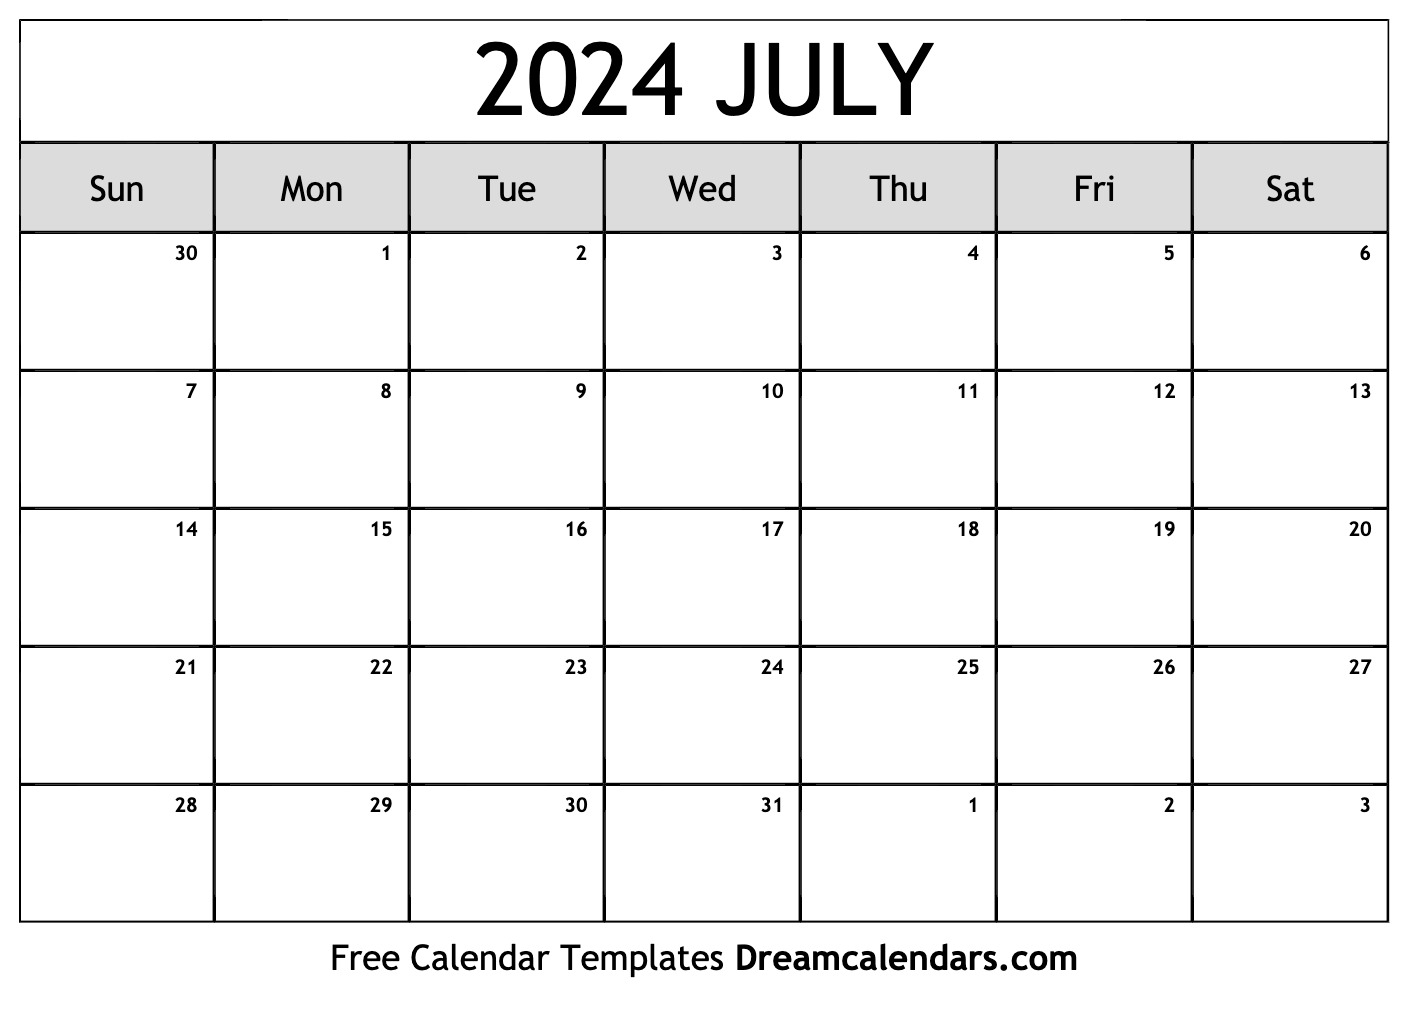 July 2024 Calendar | Free Blank Printable With Holidays for July 2024 Free Printable Calendar